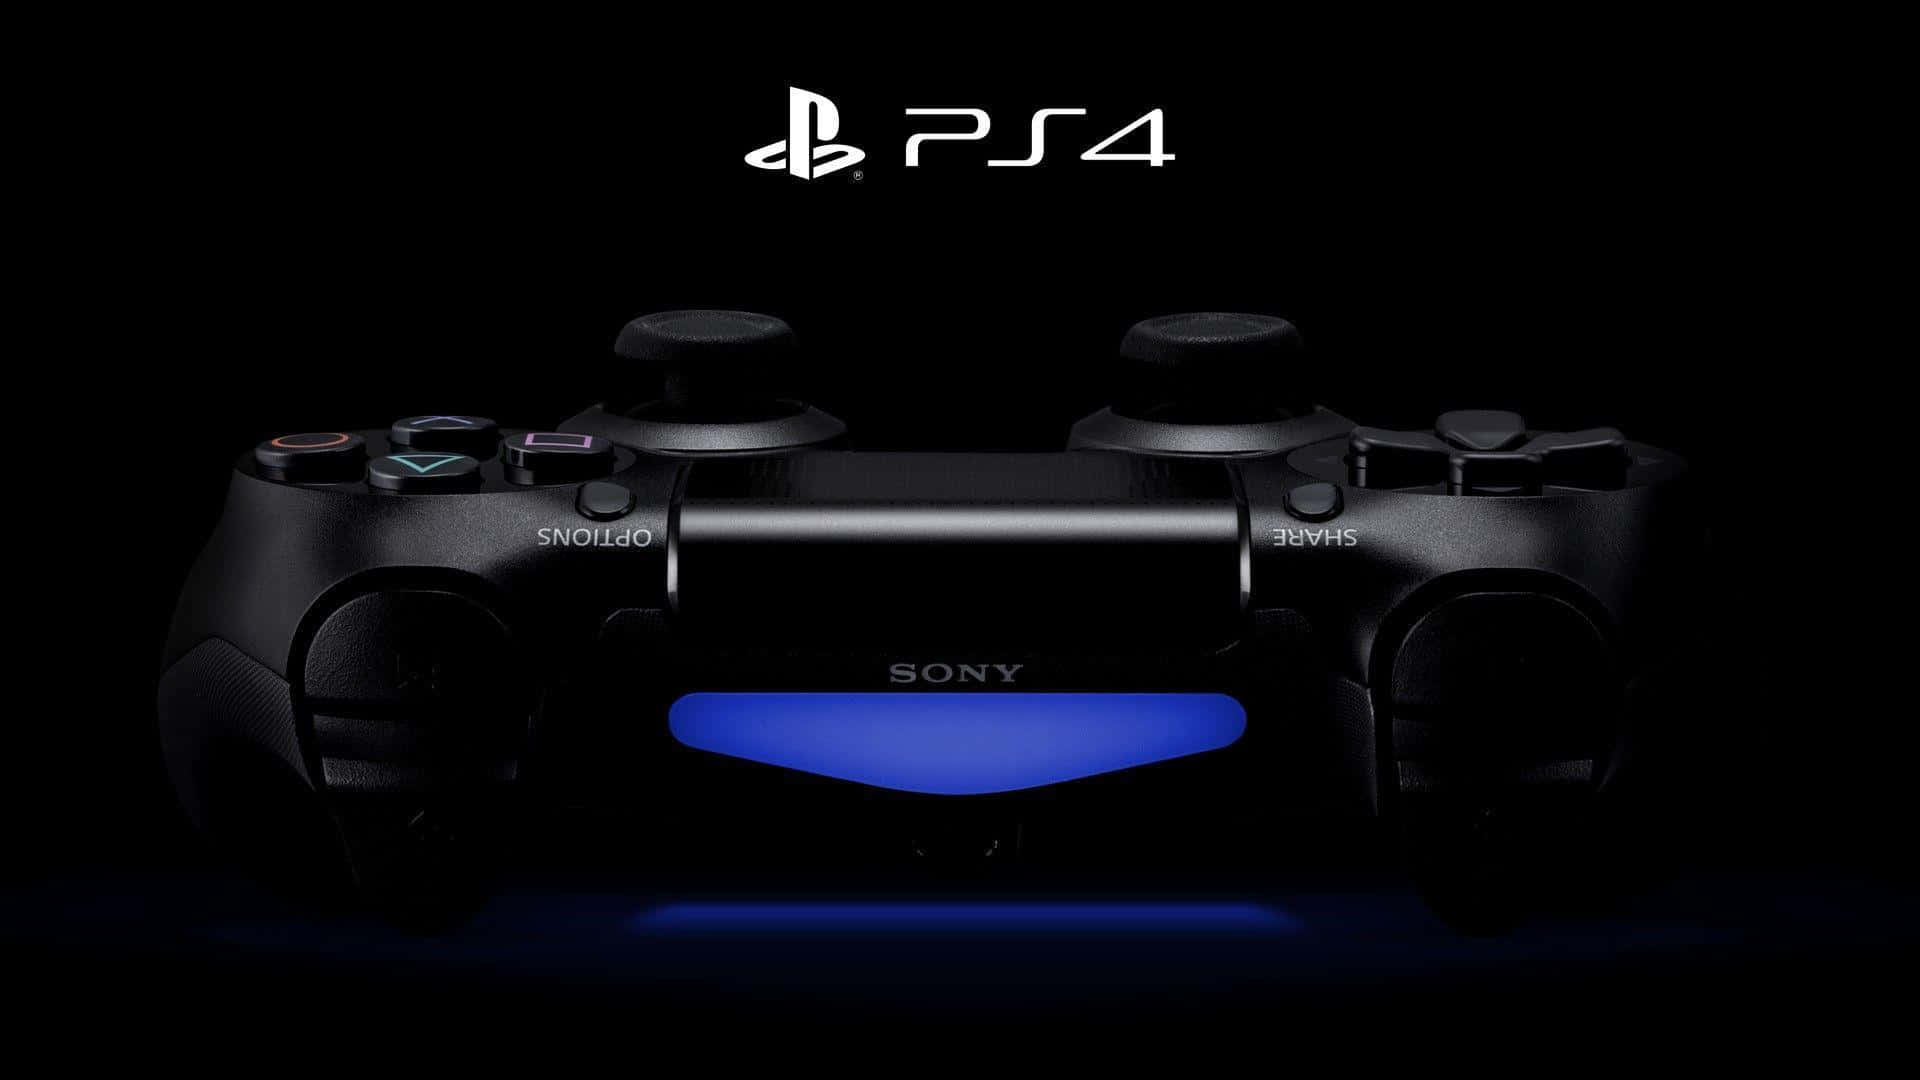 Cool Ps4 With Black Controller With Sony Logo Background